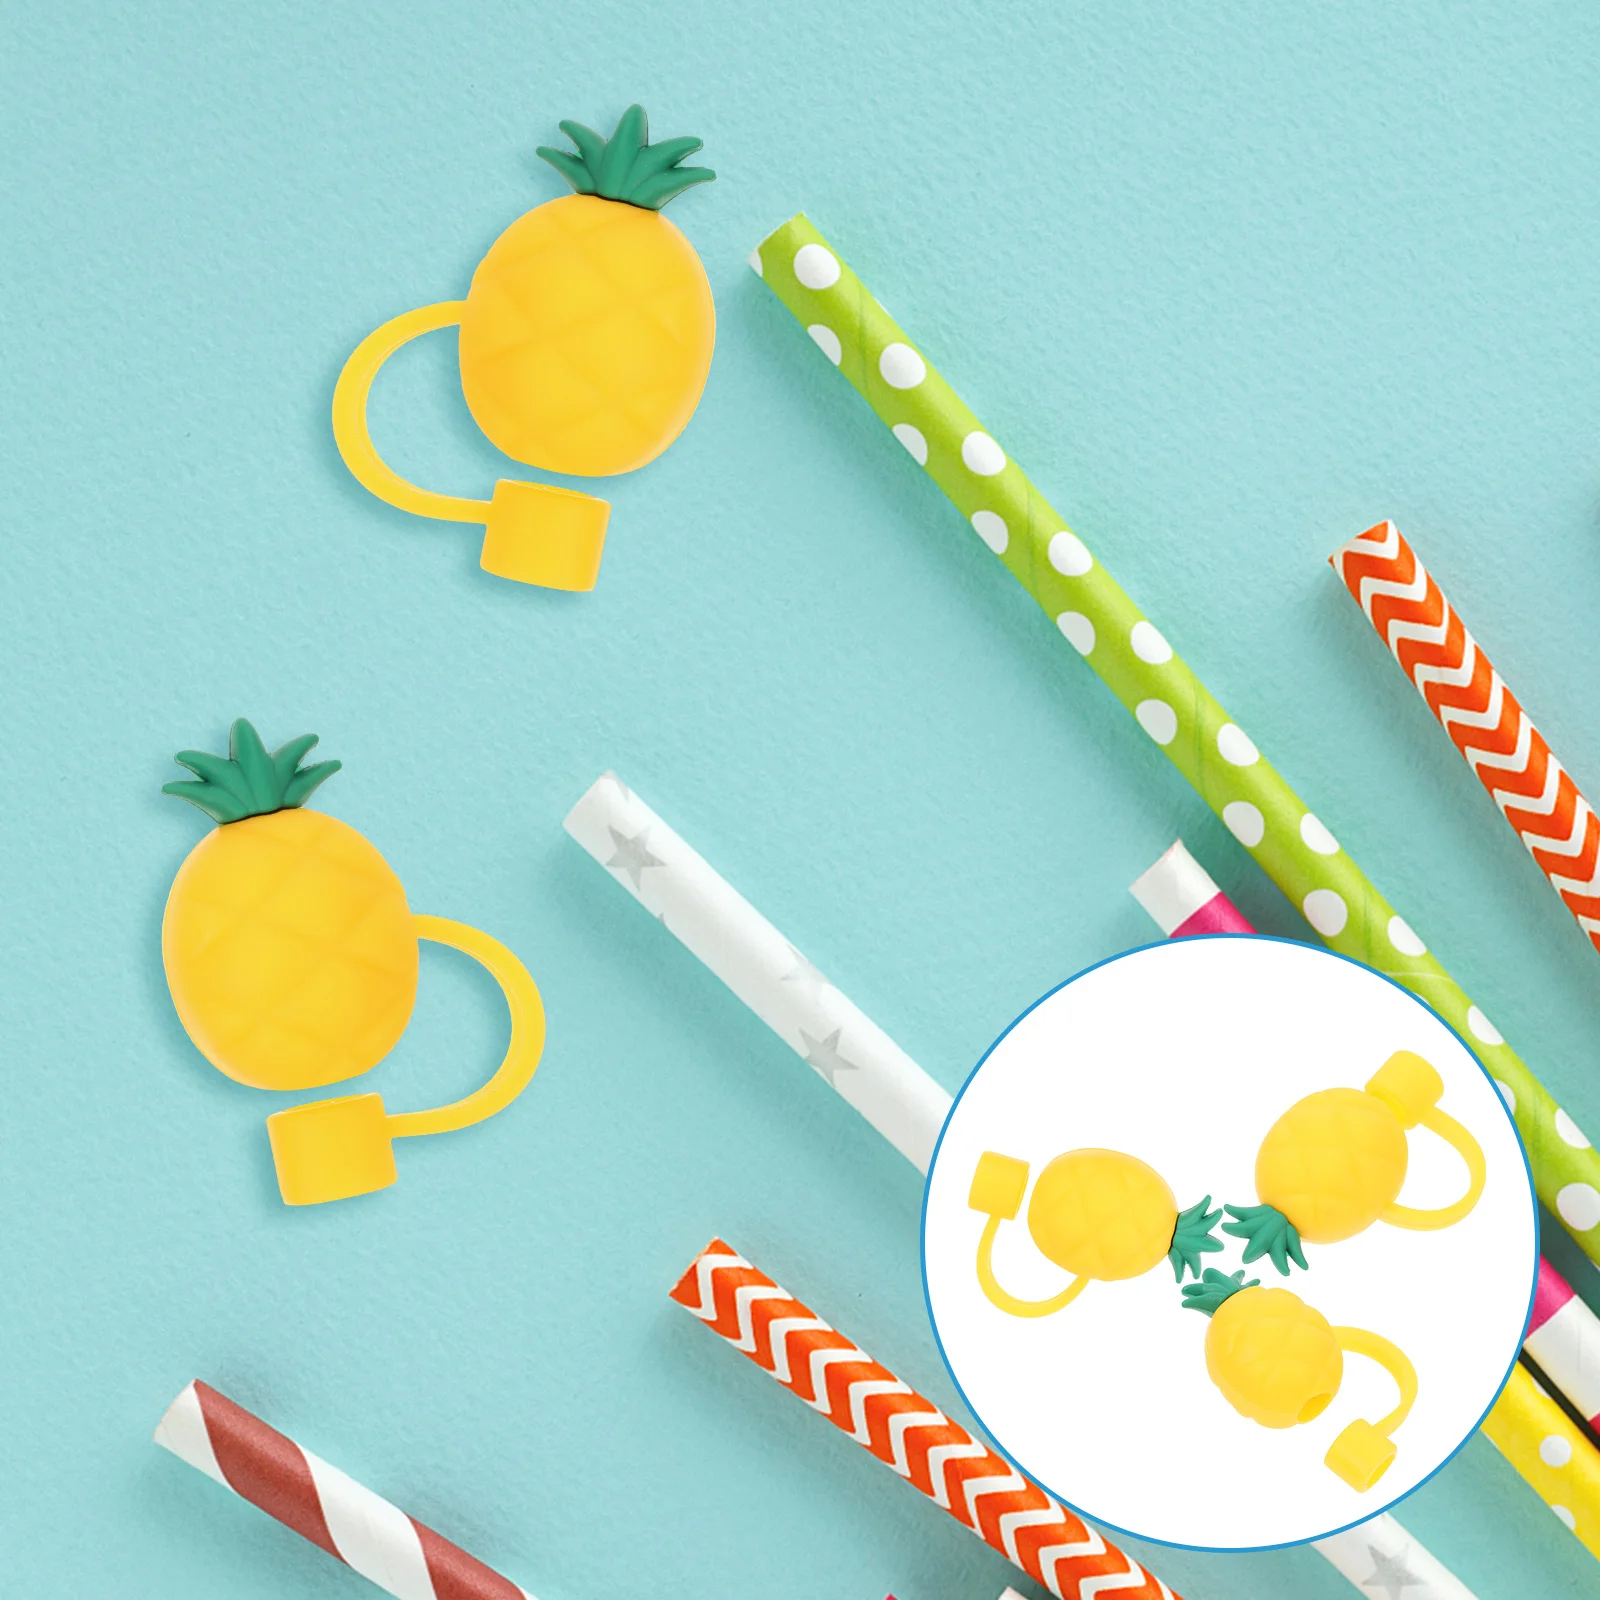 https://ae01.alicdn.com/kf/S44724acf4c664807a5451f694dedd64cL/Silicone-Straw-Covers-Covers-Caps-Drinking-Silicone-Reusable-Cap-Topper-Fruit-Tip-Pineapple-Cartoon-Plugs-Plug.jpg